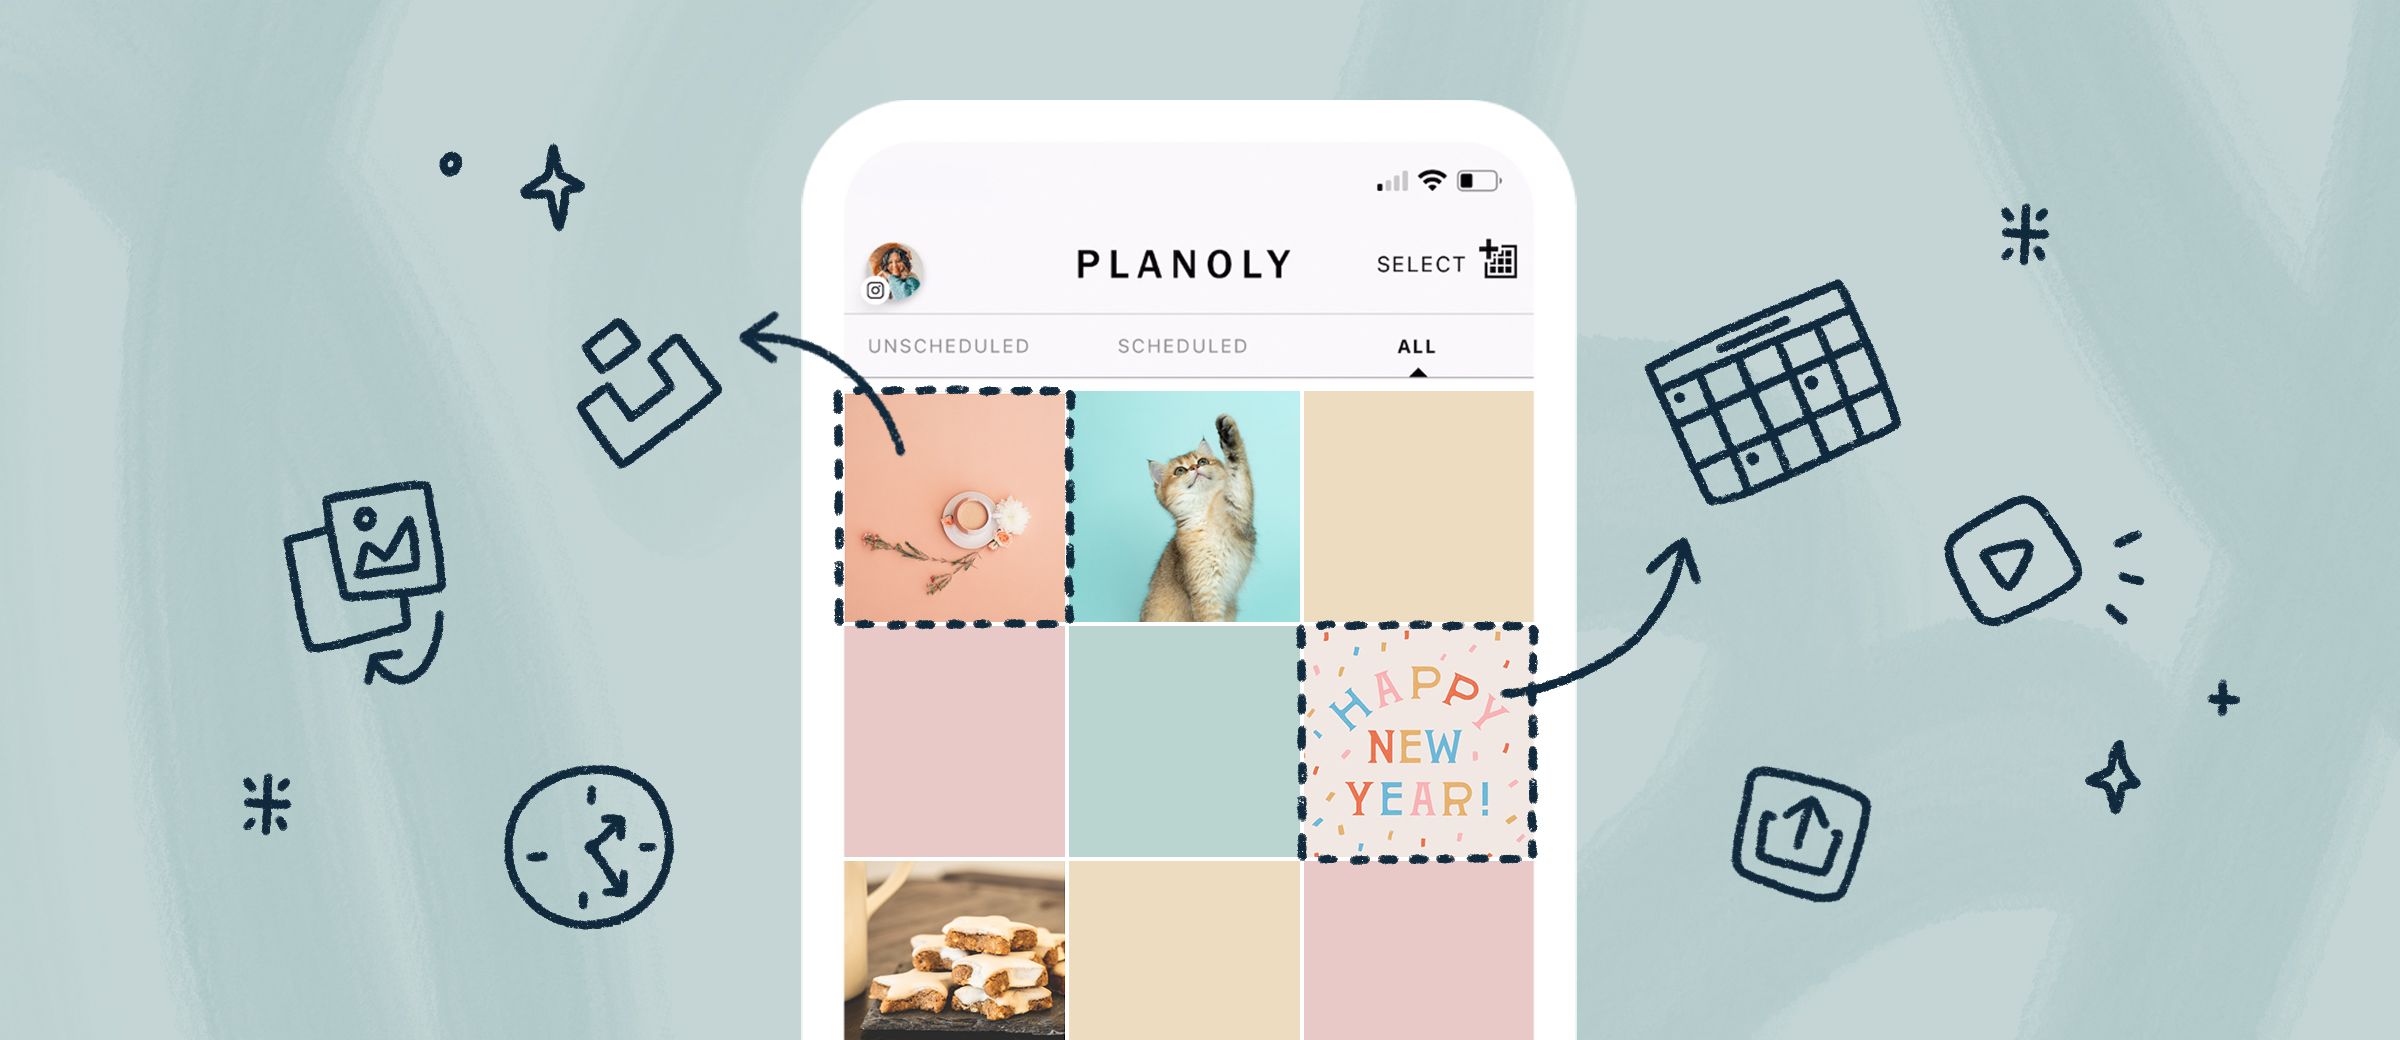 Read about The Benefits of Using a Paid PLANOLY Account, on PLANOLY